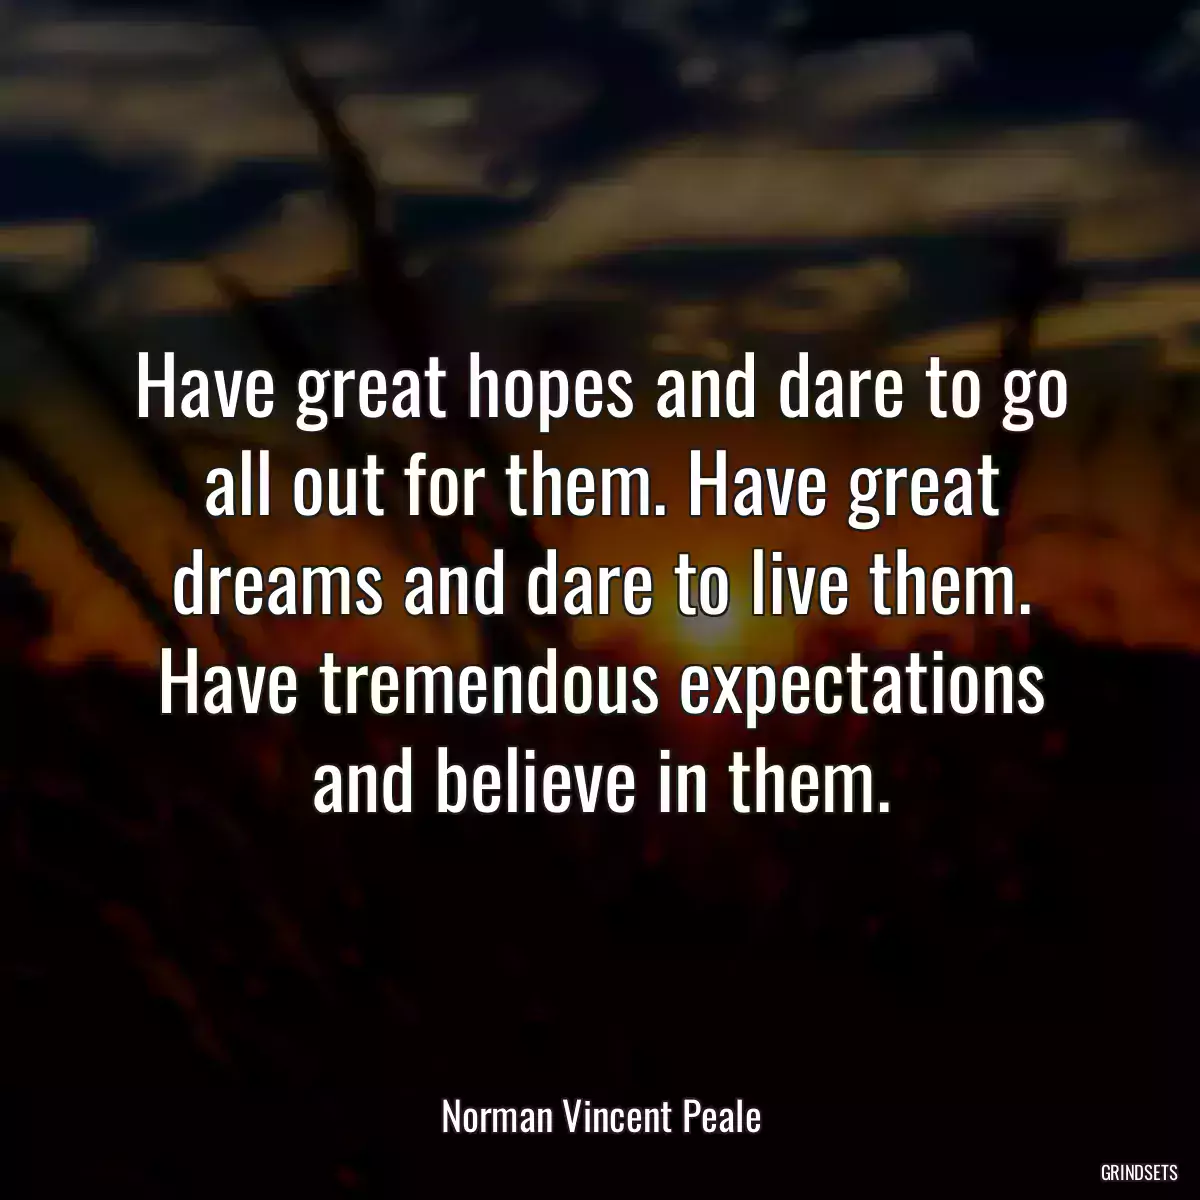 Have great hopes and dare to go all out for them. Have great dreams and dare to live them. Have tremendous expectations and believe in them.